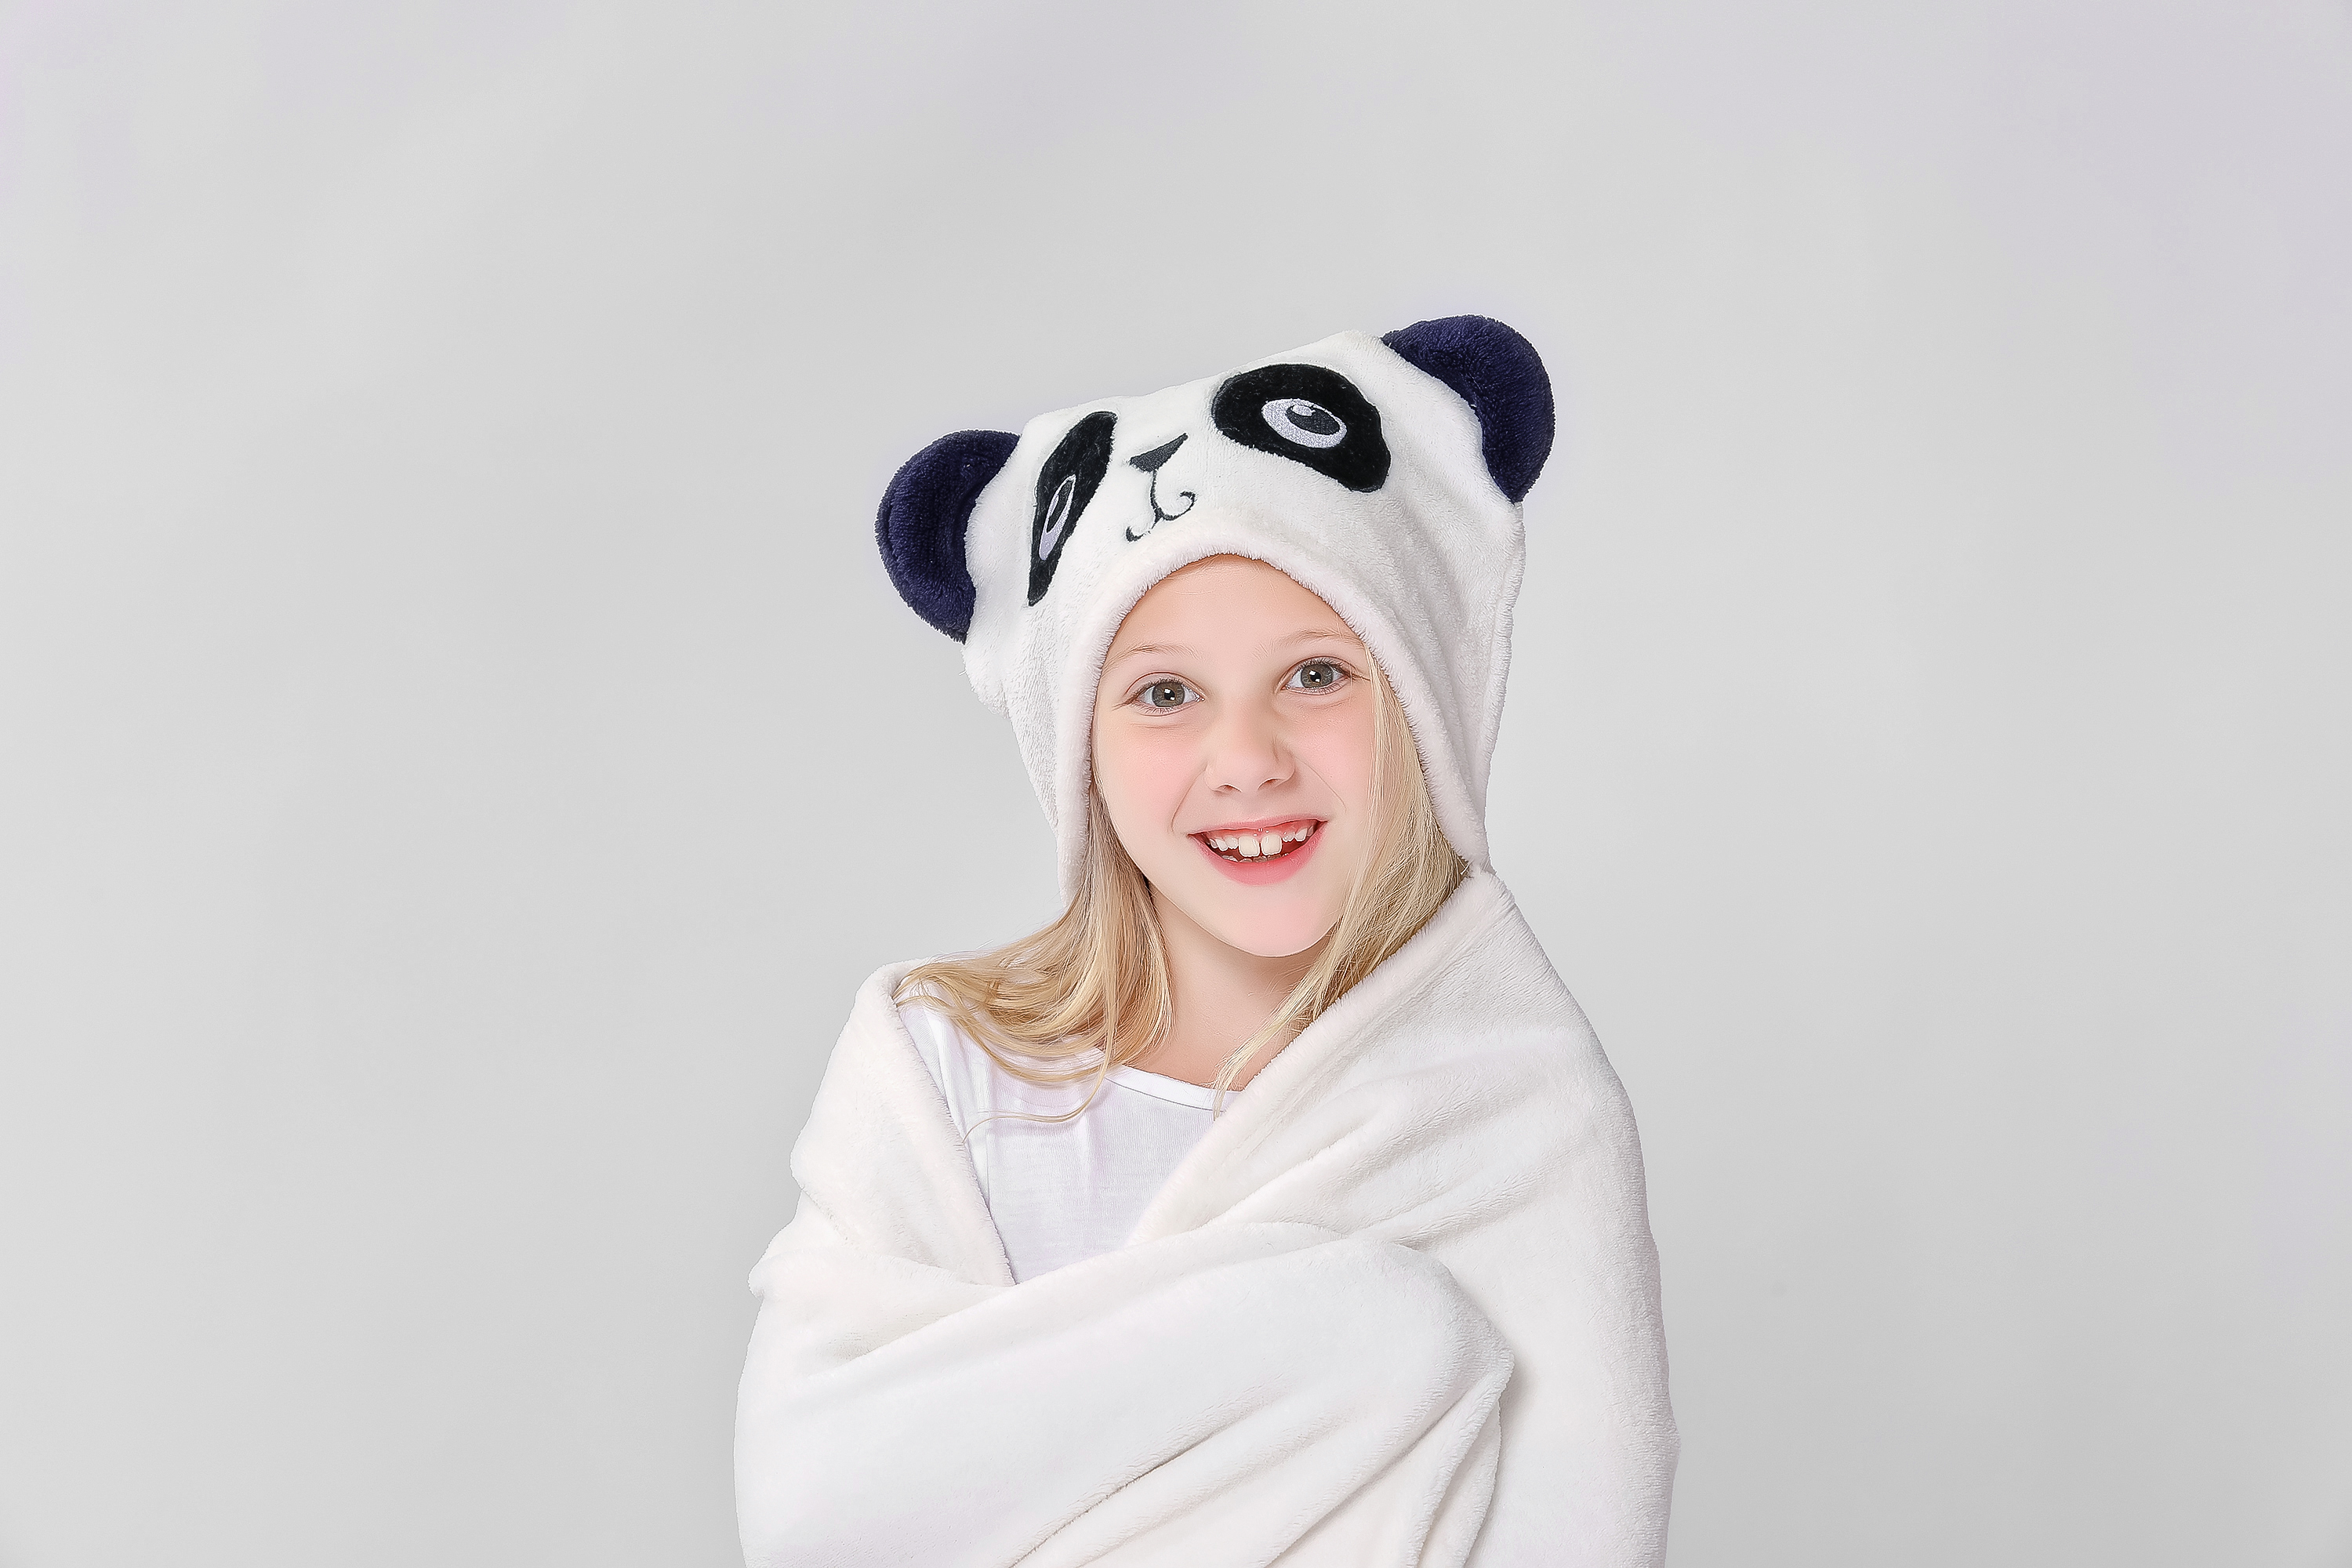 Panda Hooded Throw for Kids by Down Home - image 3 of 4